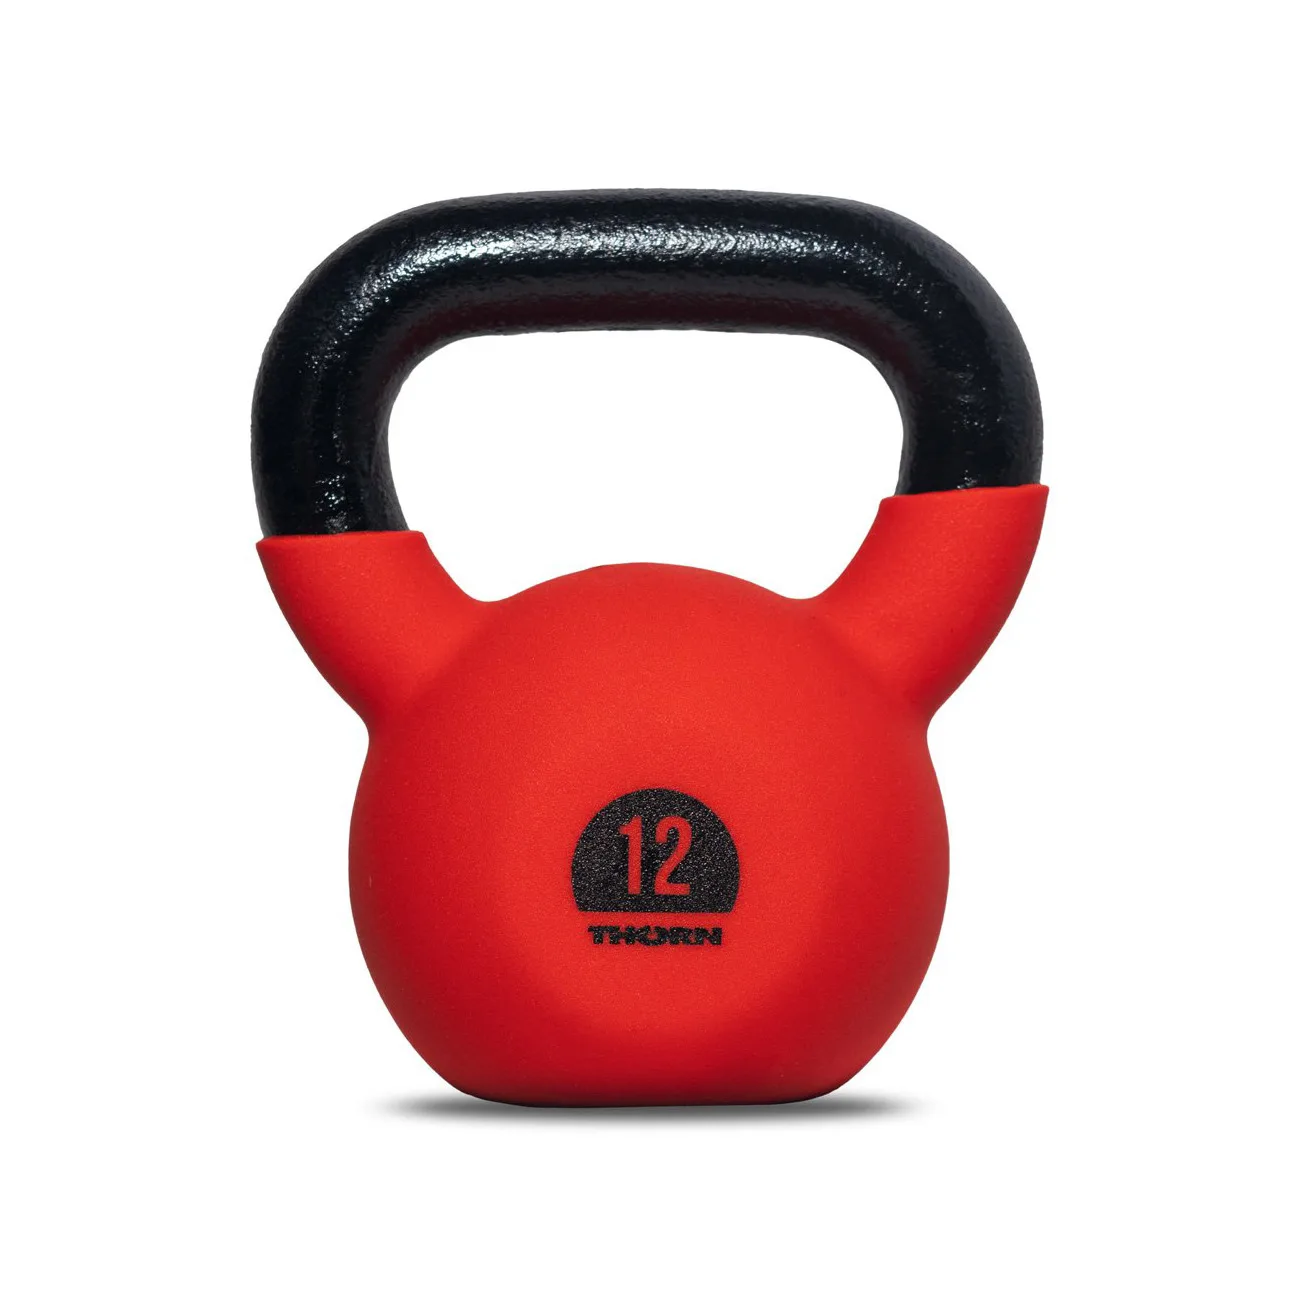 Cast-iron kettlebell with rubber protective coating 12 kg